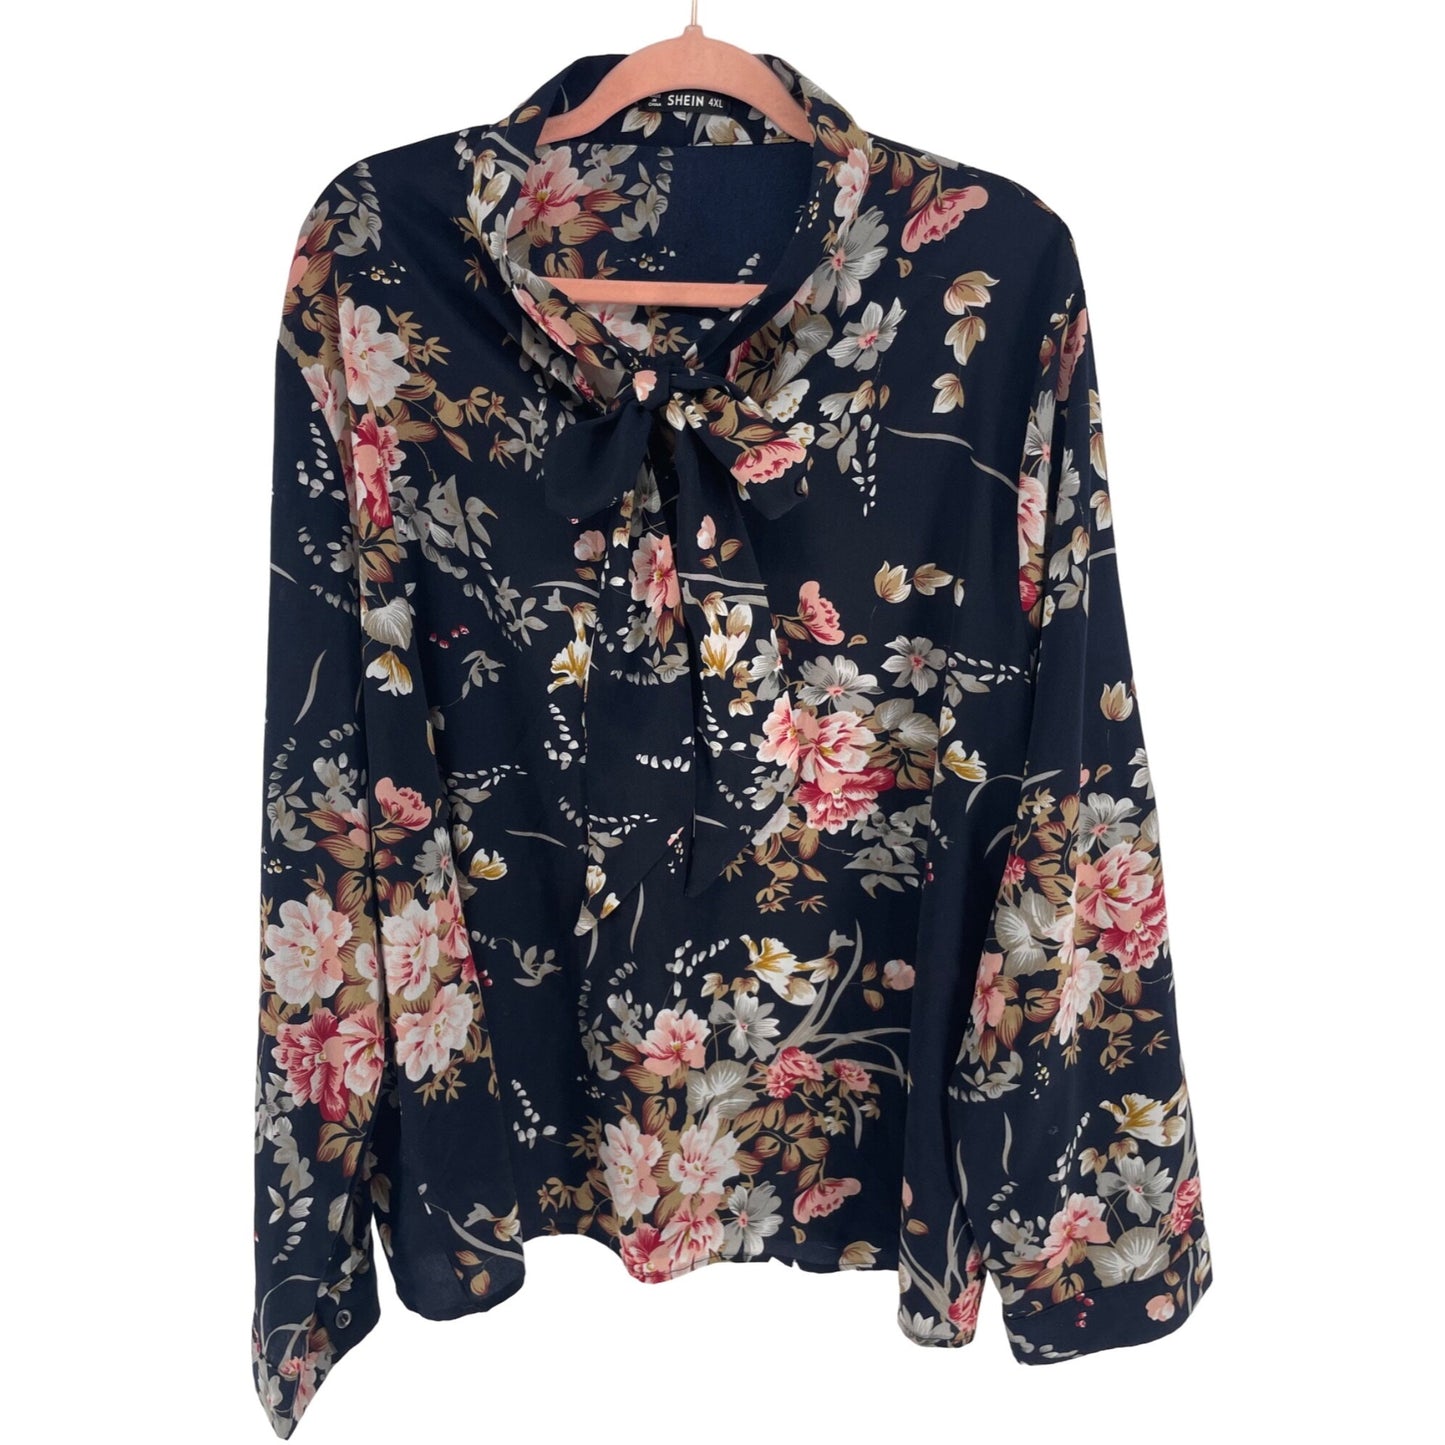 Shein 4XL Navy Blue/Multi-Colored Floral Long-Sleeved Blouse W/ Sash